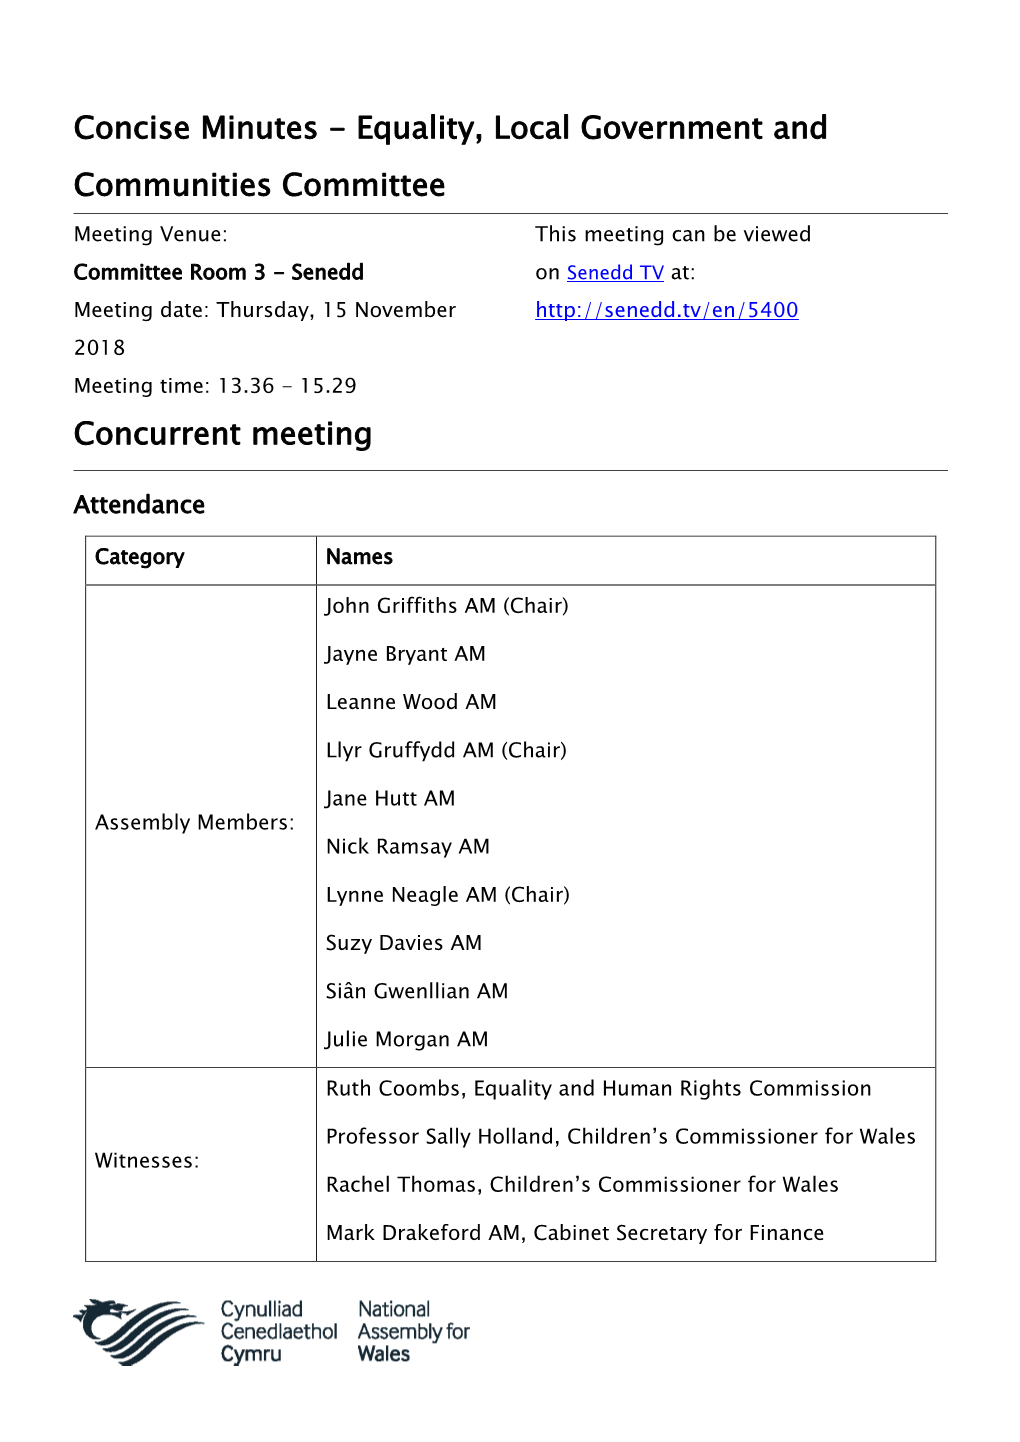 Concise Minutes - Equality, Local Government and Communities Committee